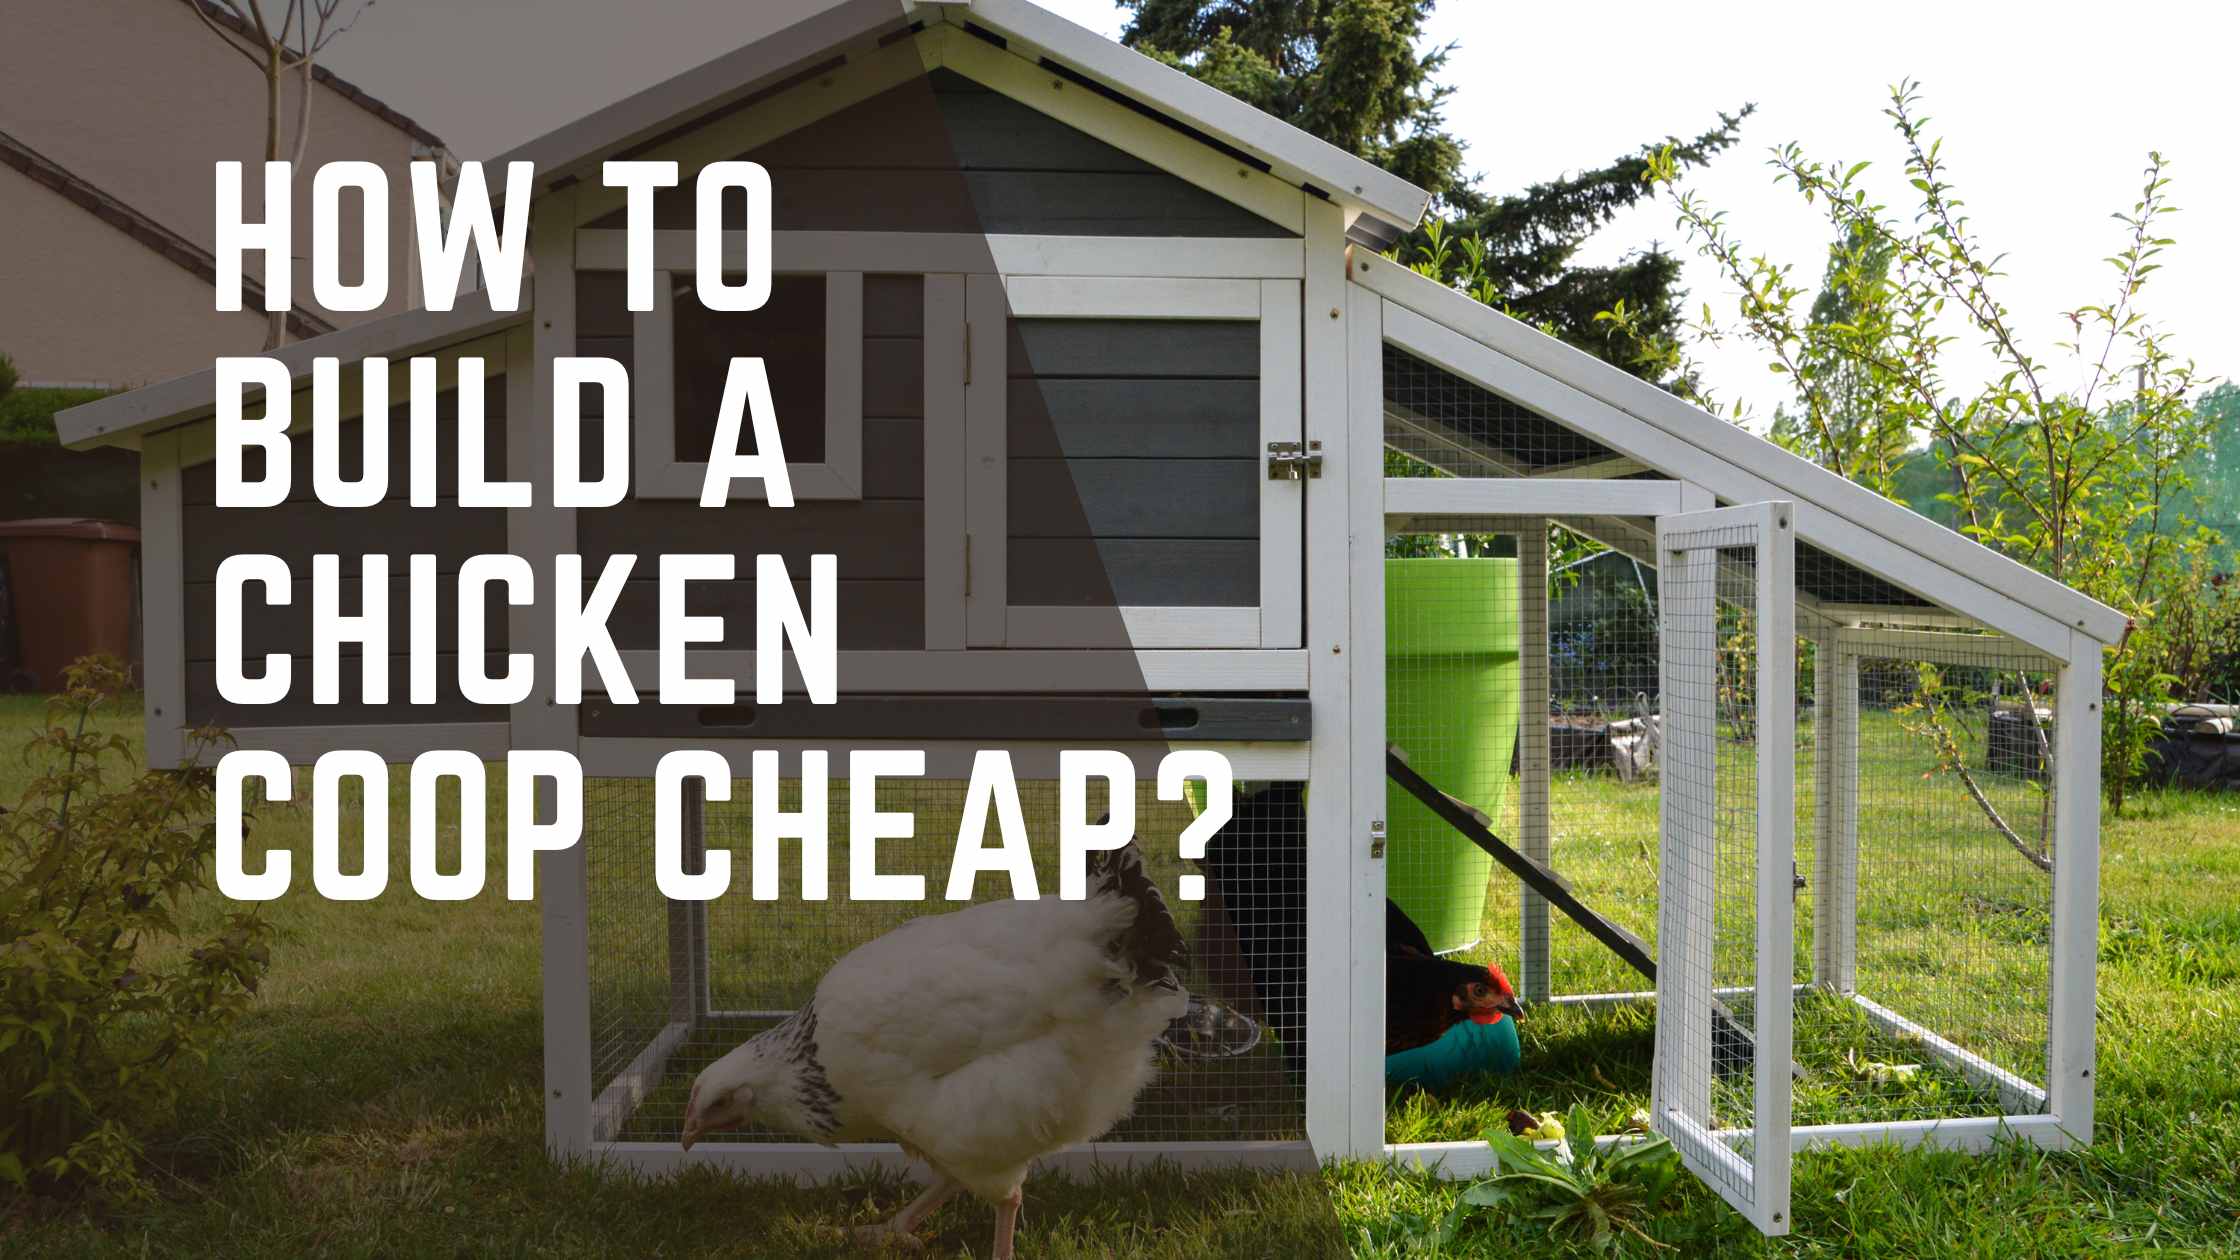 How to Build a Chicken Coop Cheap?